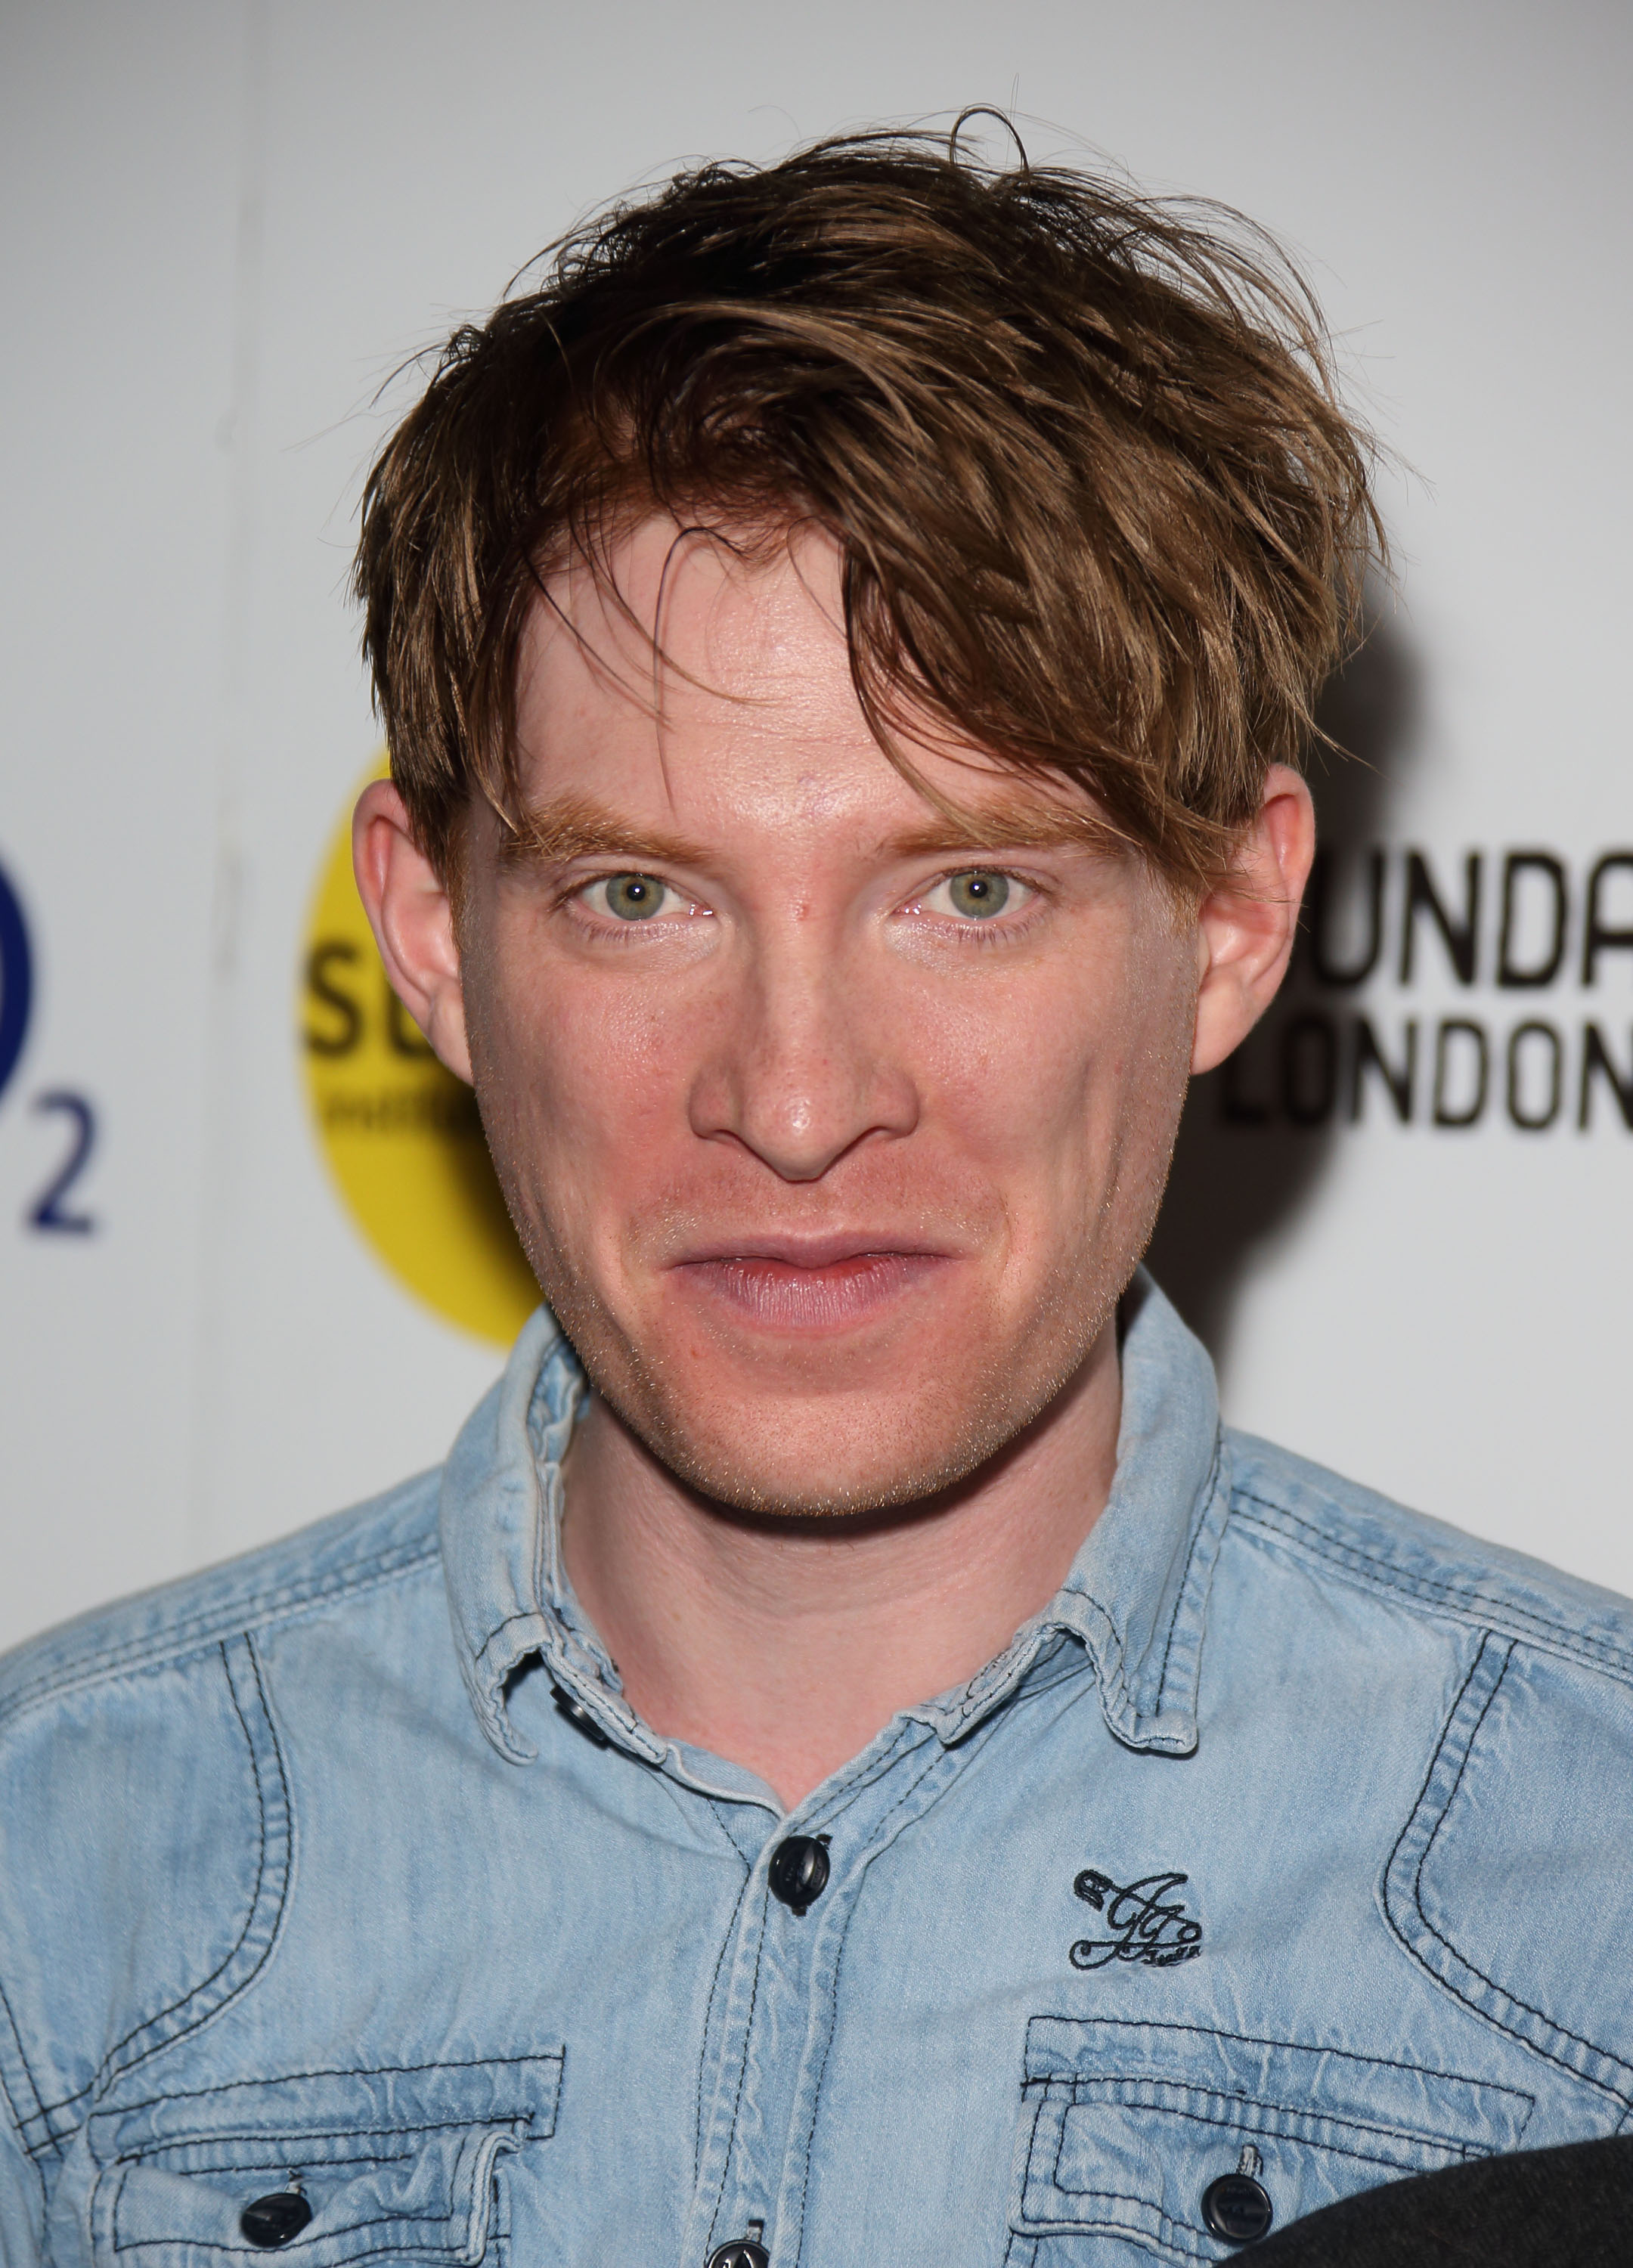 Domhnall Gleeson
                              The Irish actor is perhaps best known in the US for his role as Bill Weasley in Harry Potter and the Deathly Hallows.